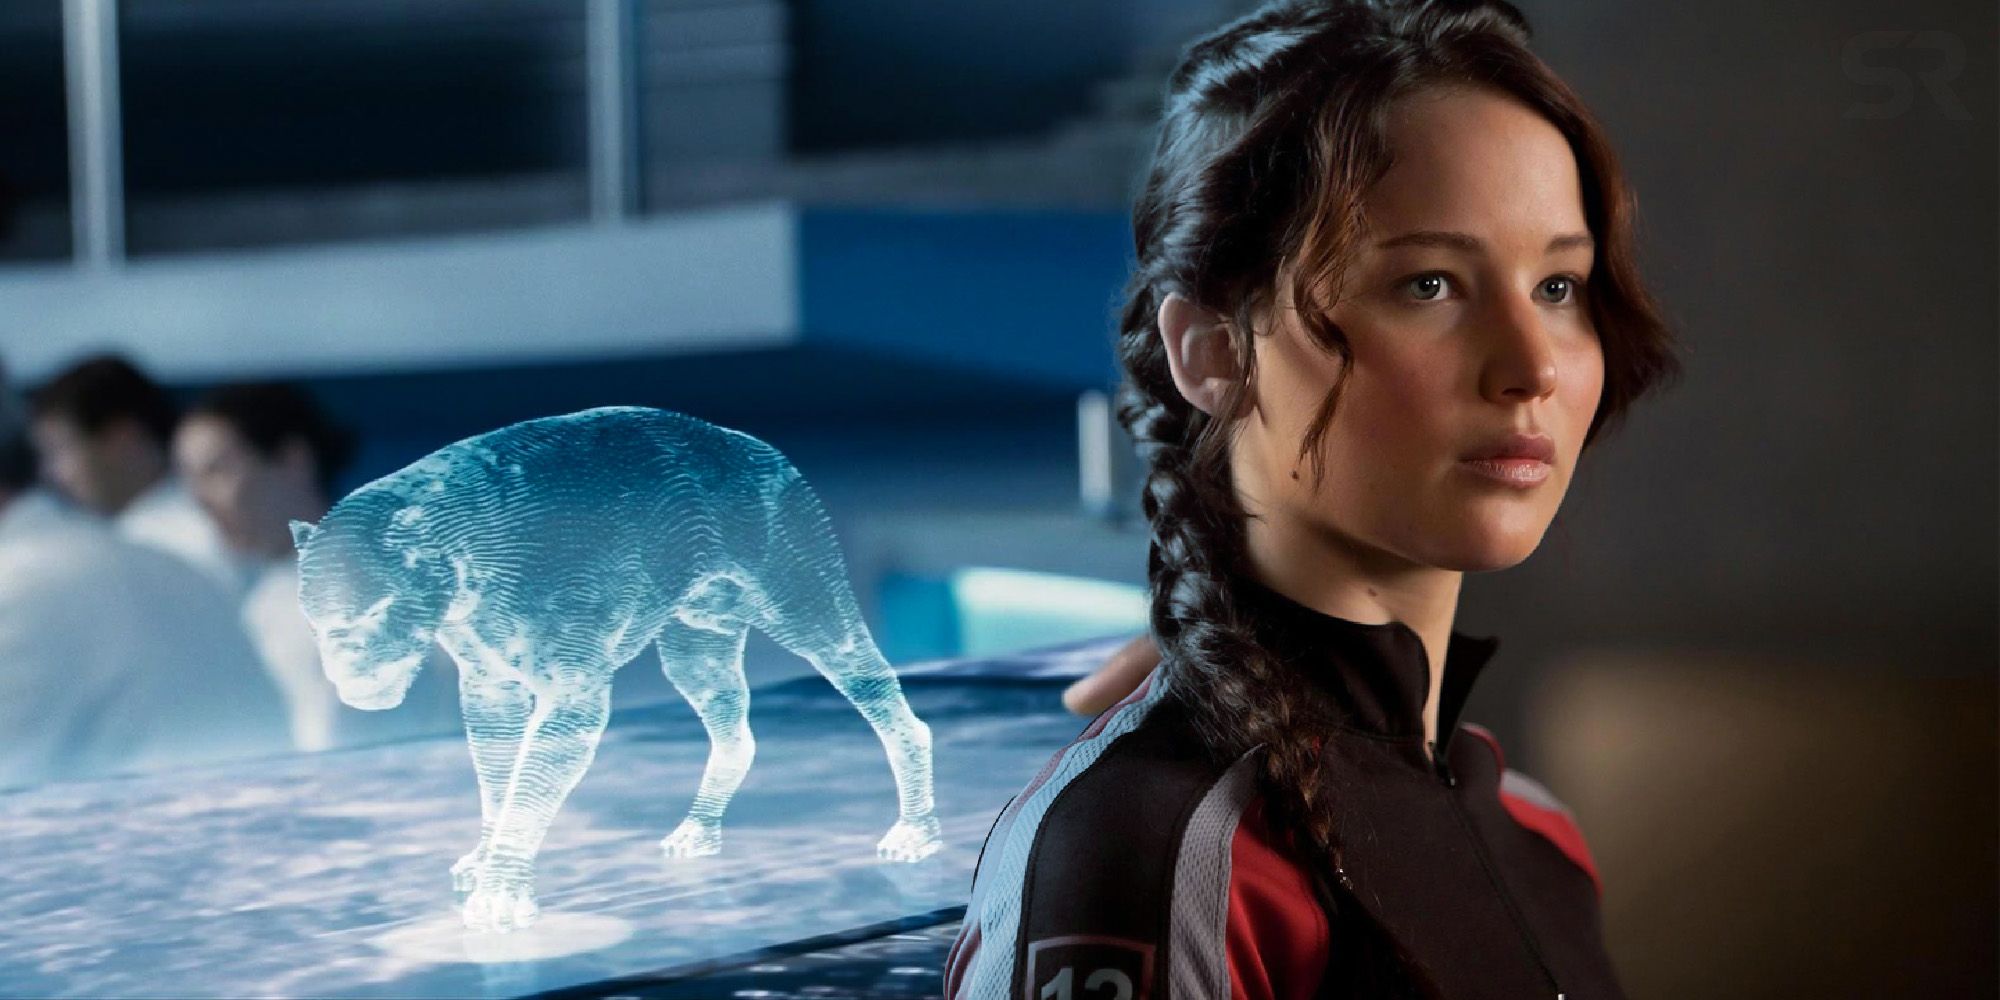 An image showing a hologram of the muttations and Katniss from The Hunger Games